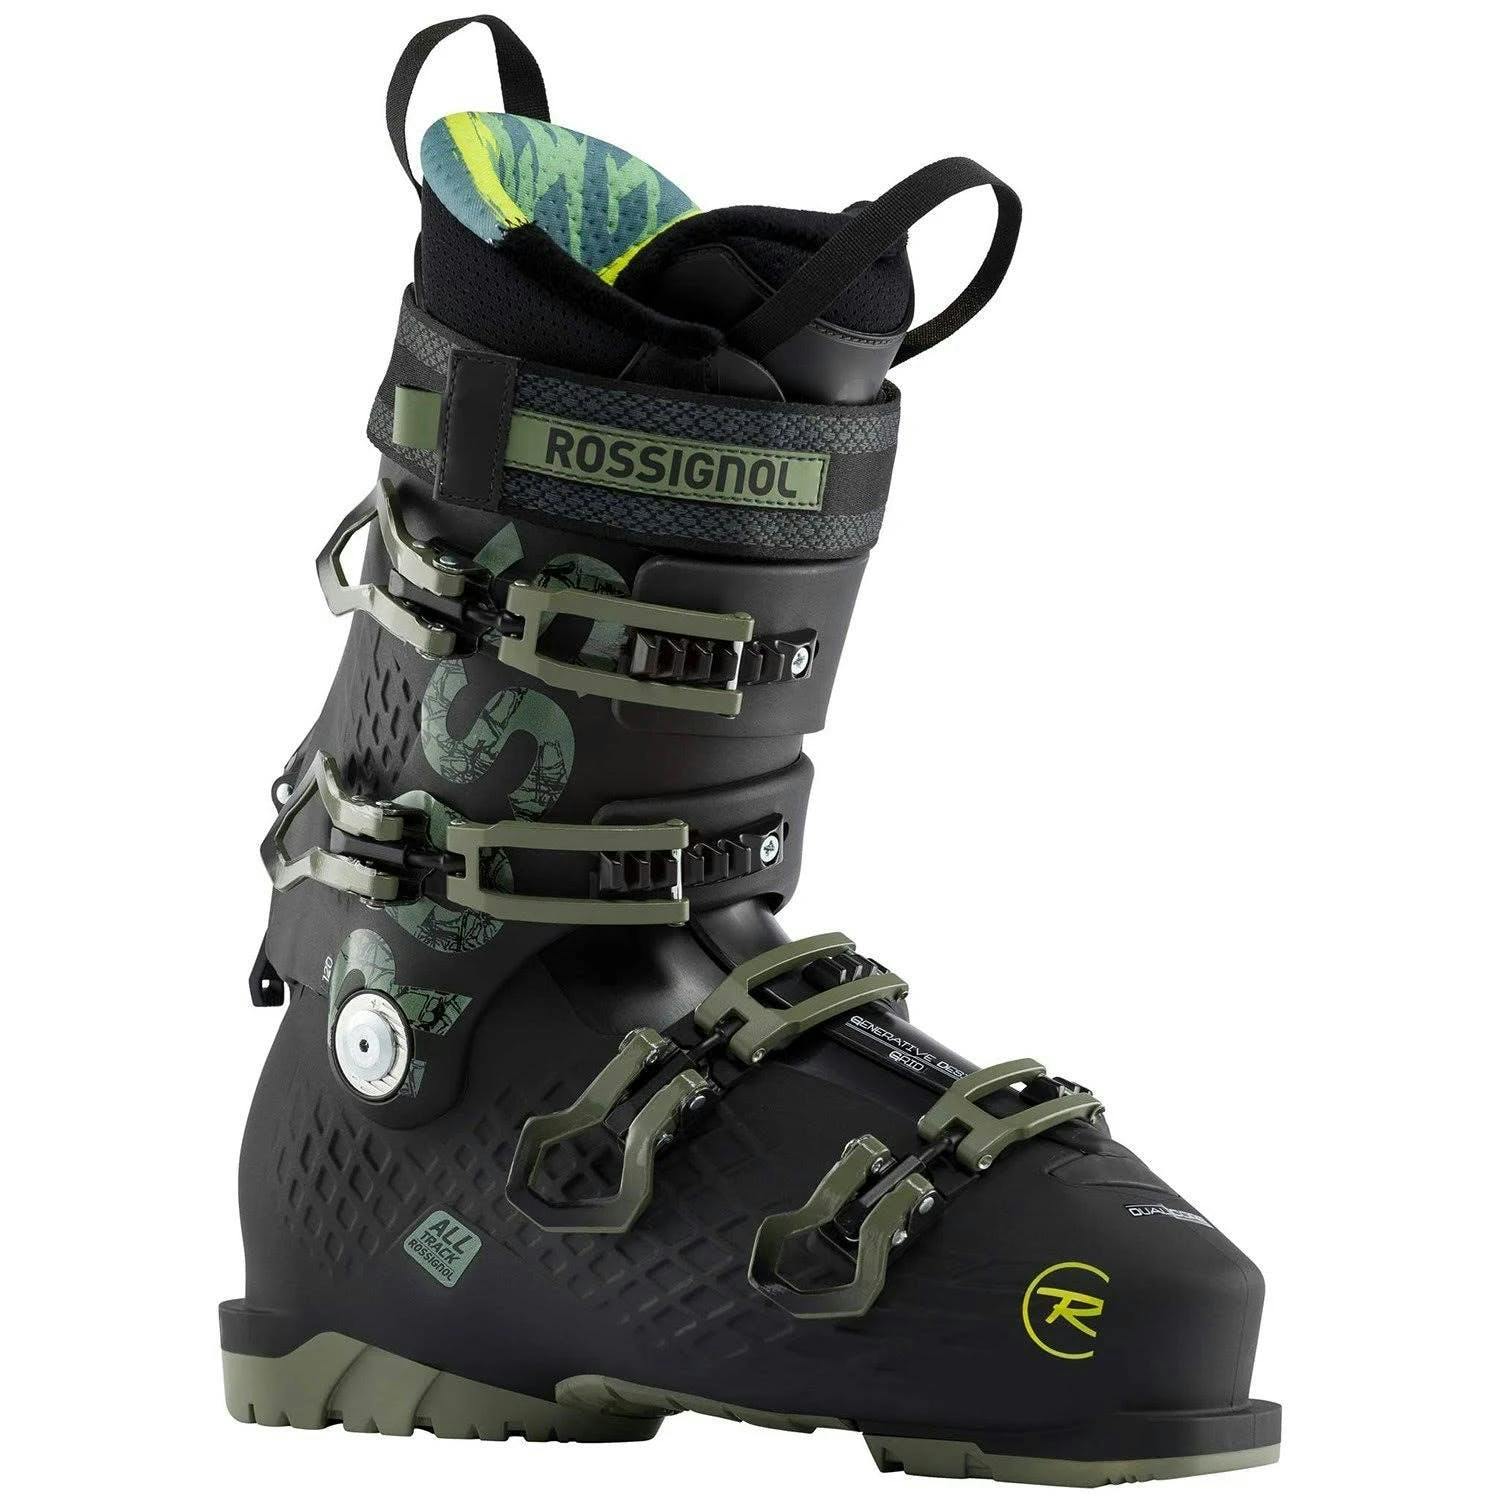 A black ski boot with green accents and a label reading Rossignol